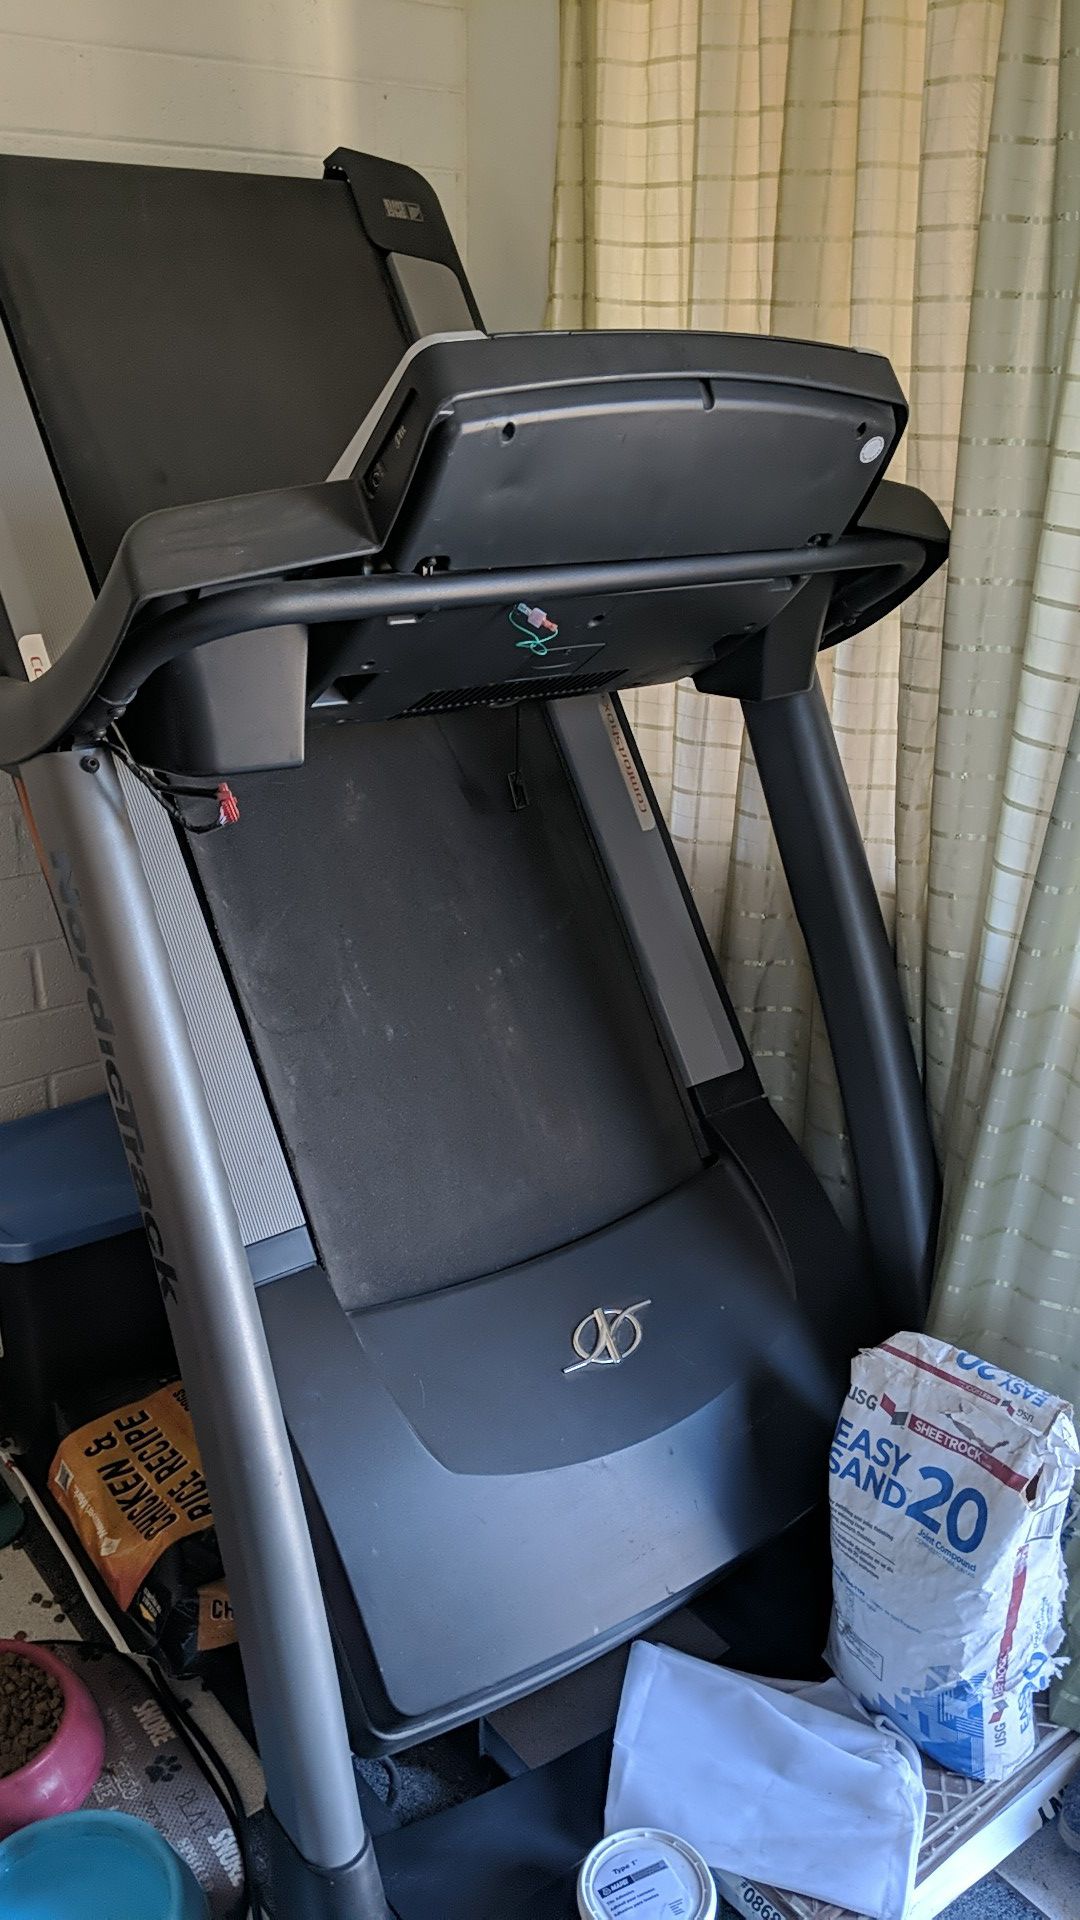 Treadmill with incline NordicTrack A2250 PRO